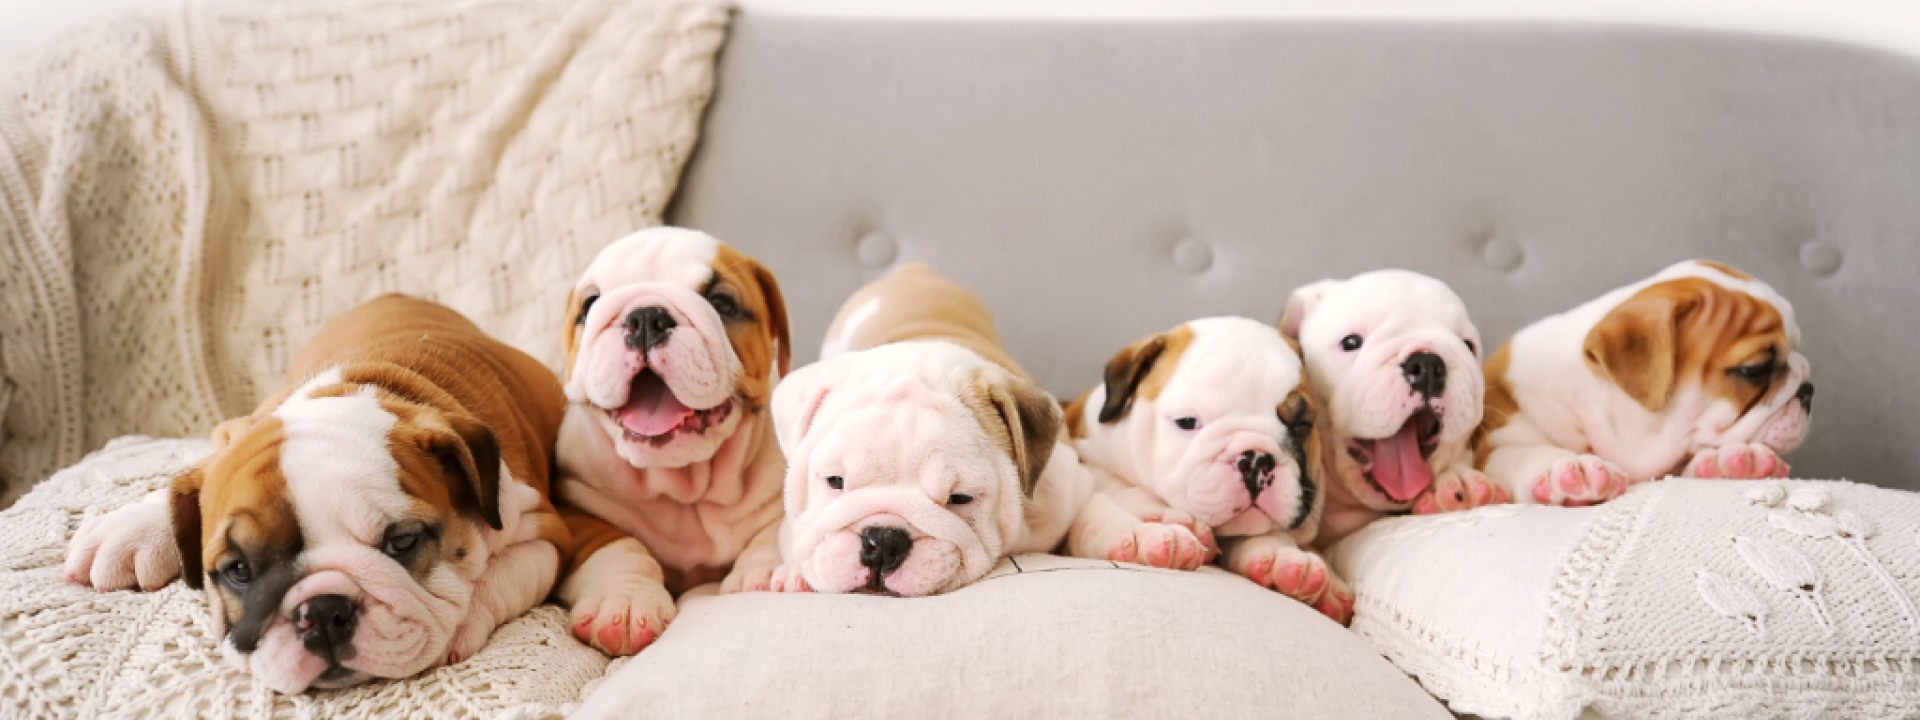 Litter of puppies on couch.